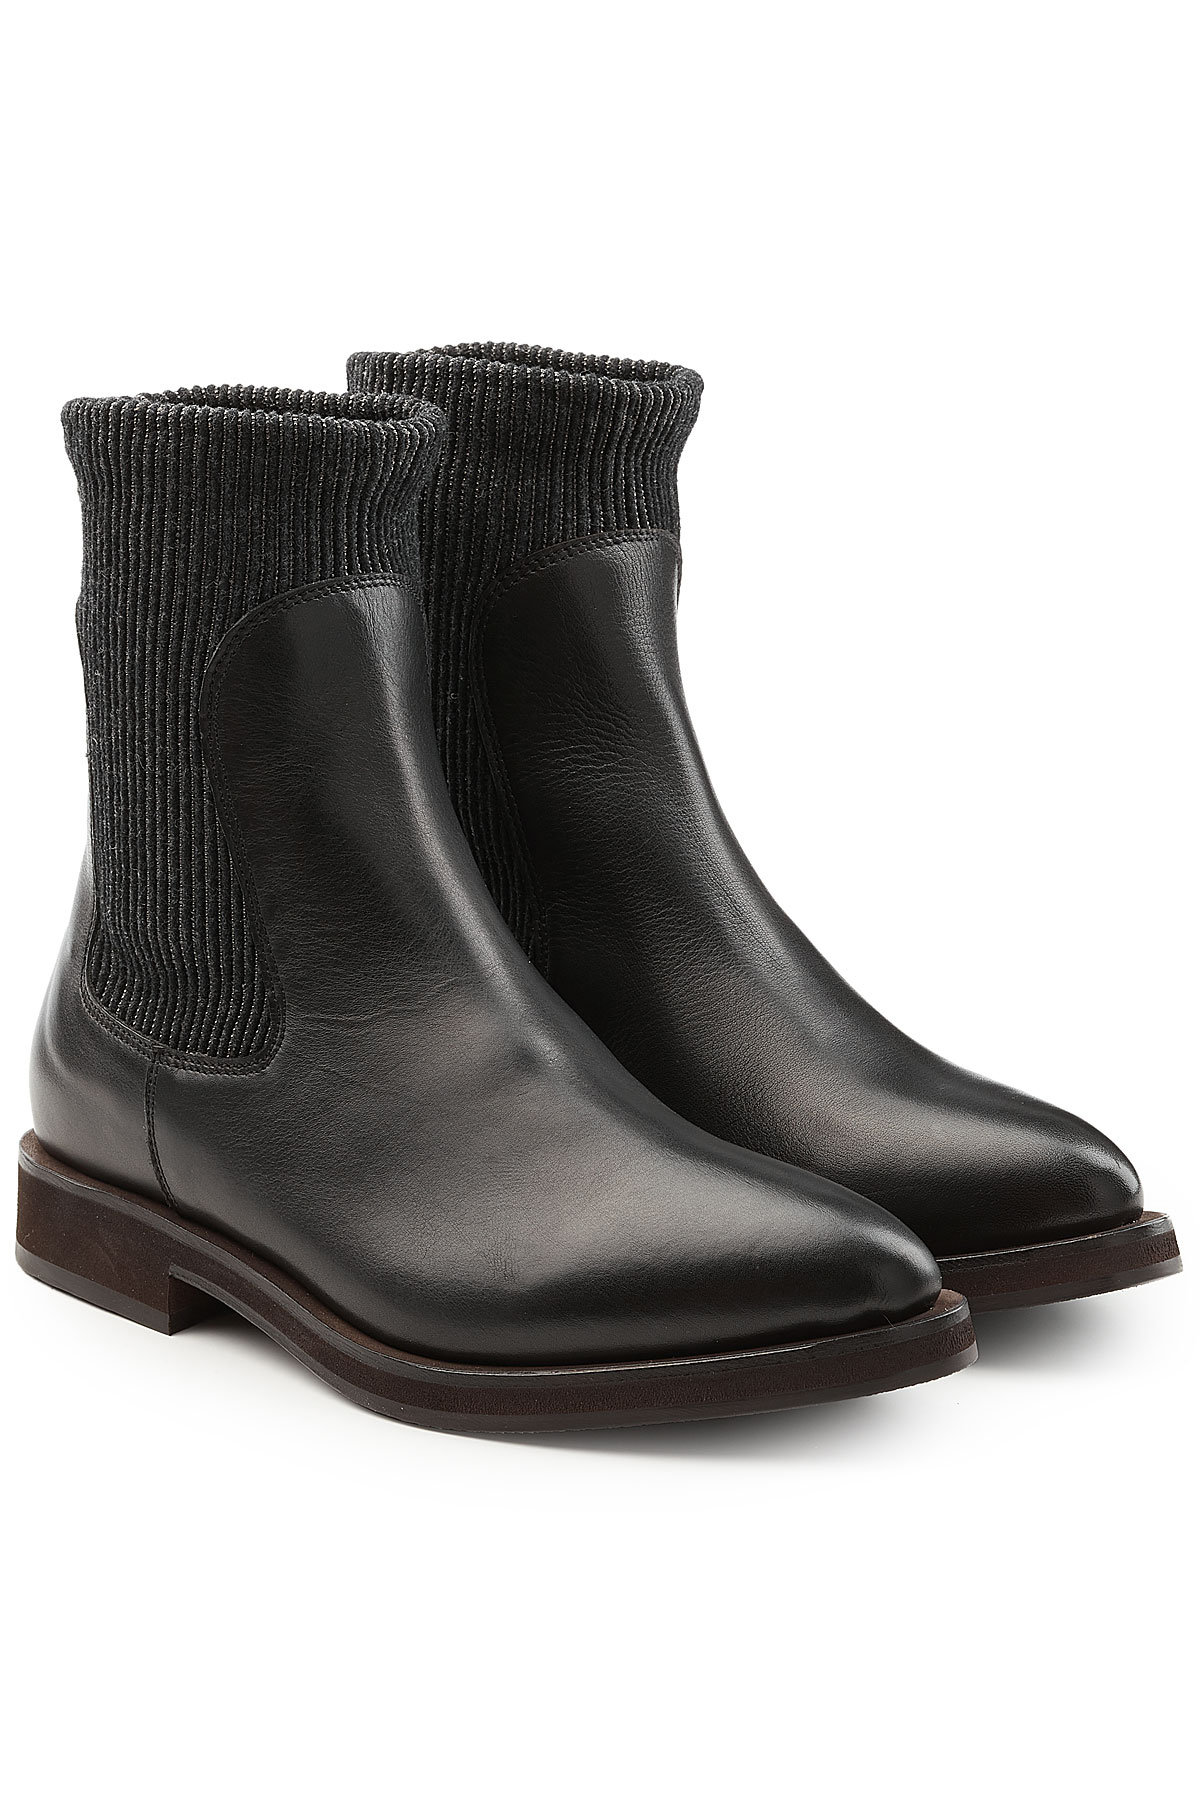 Brunello Cucinelli - Leather Ankle Boots with Tweed